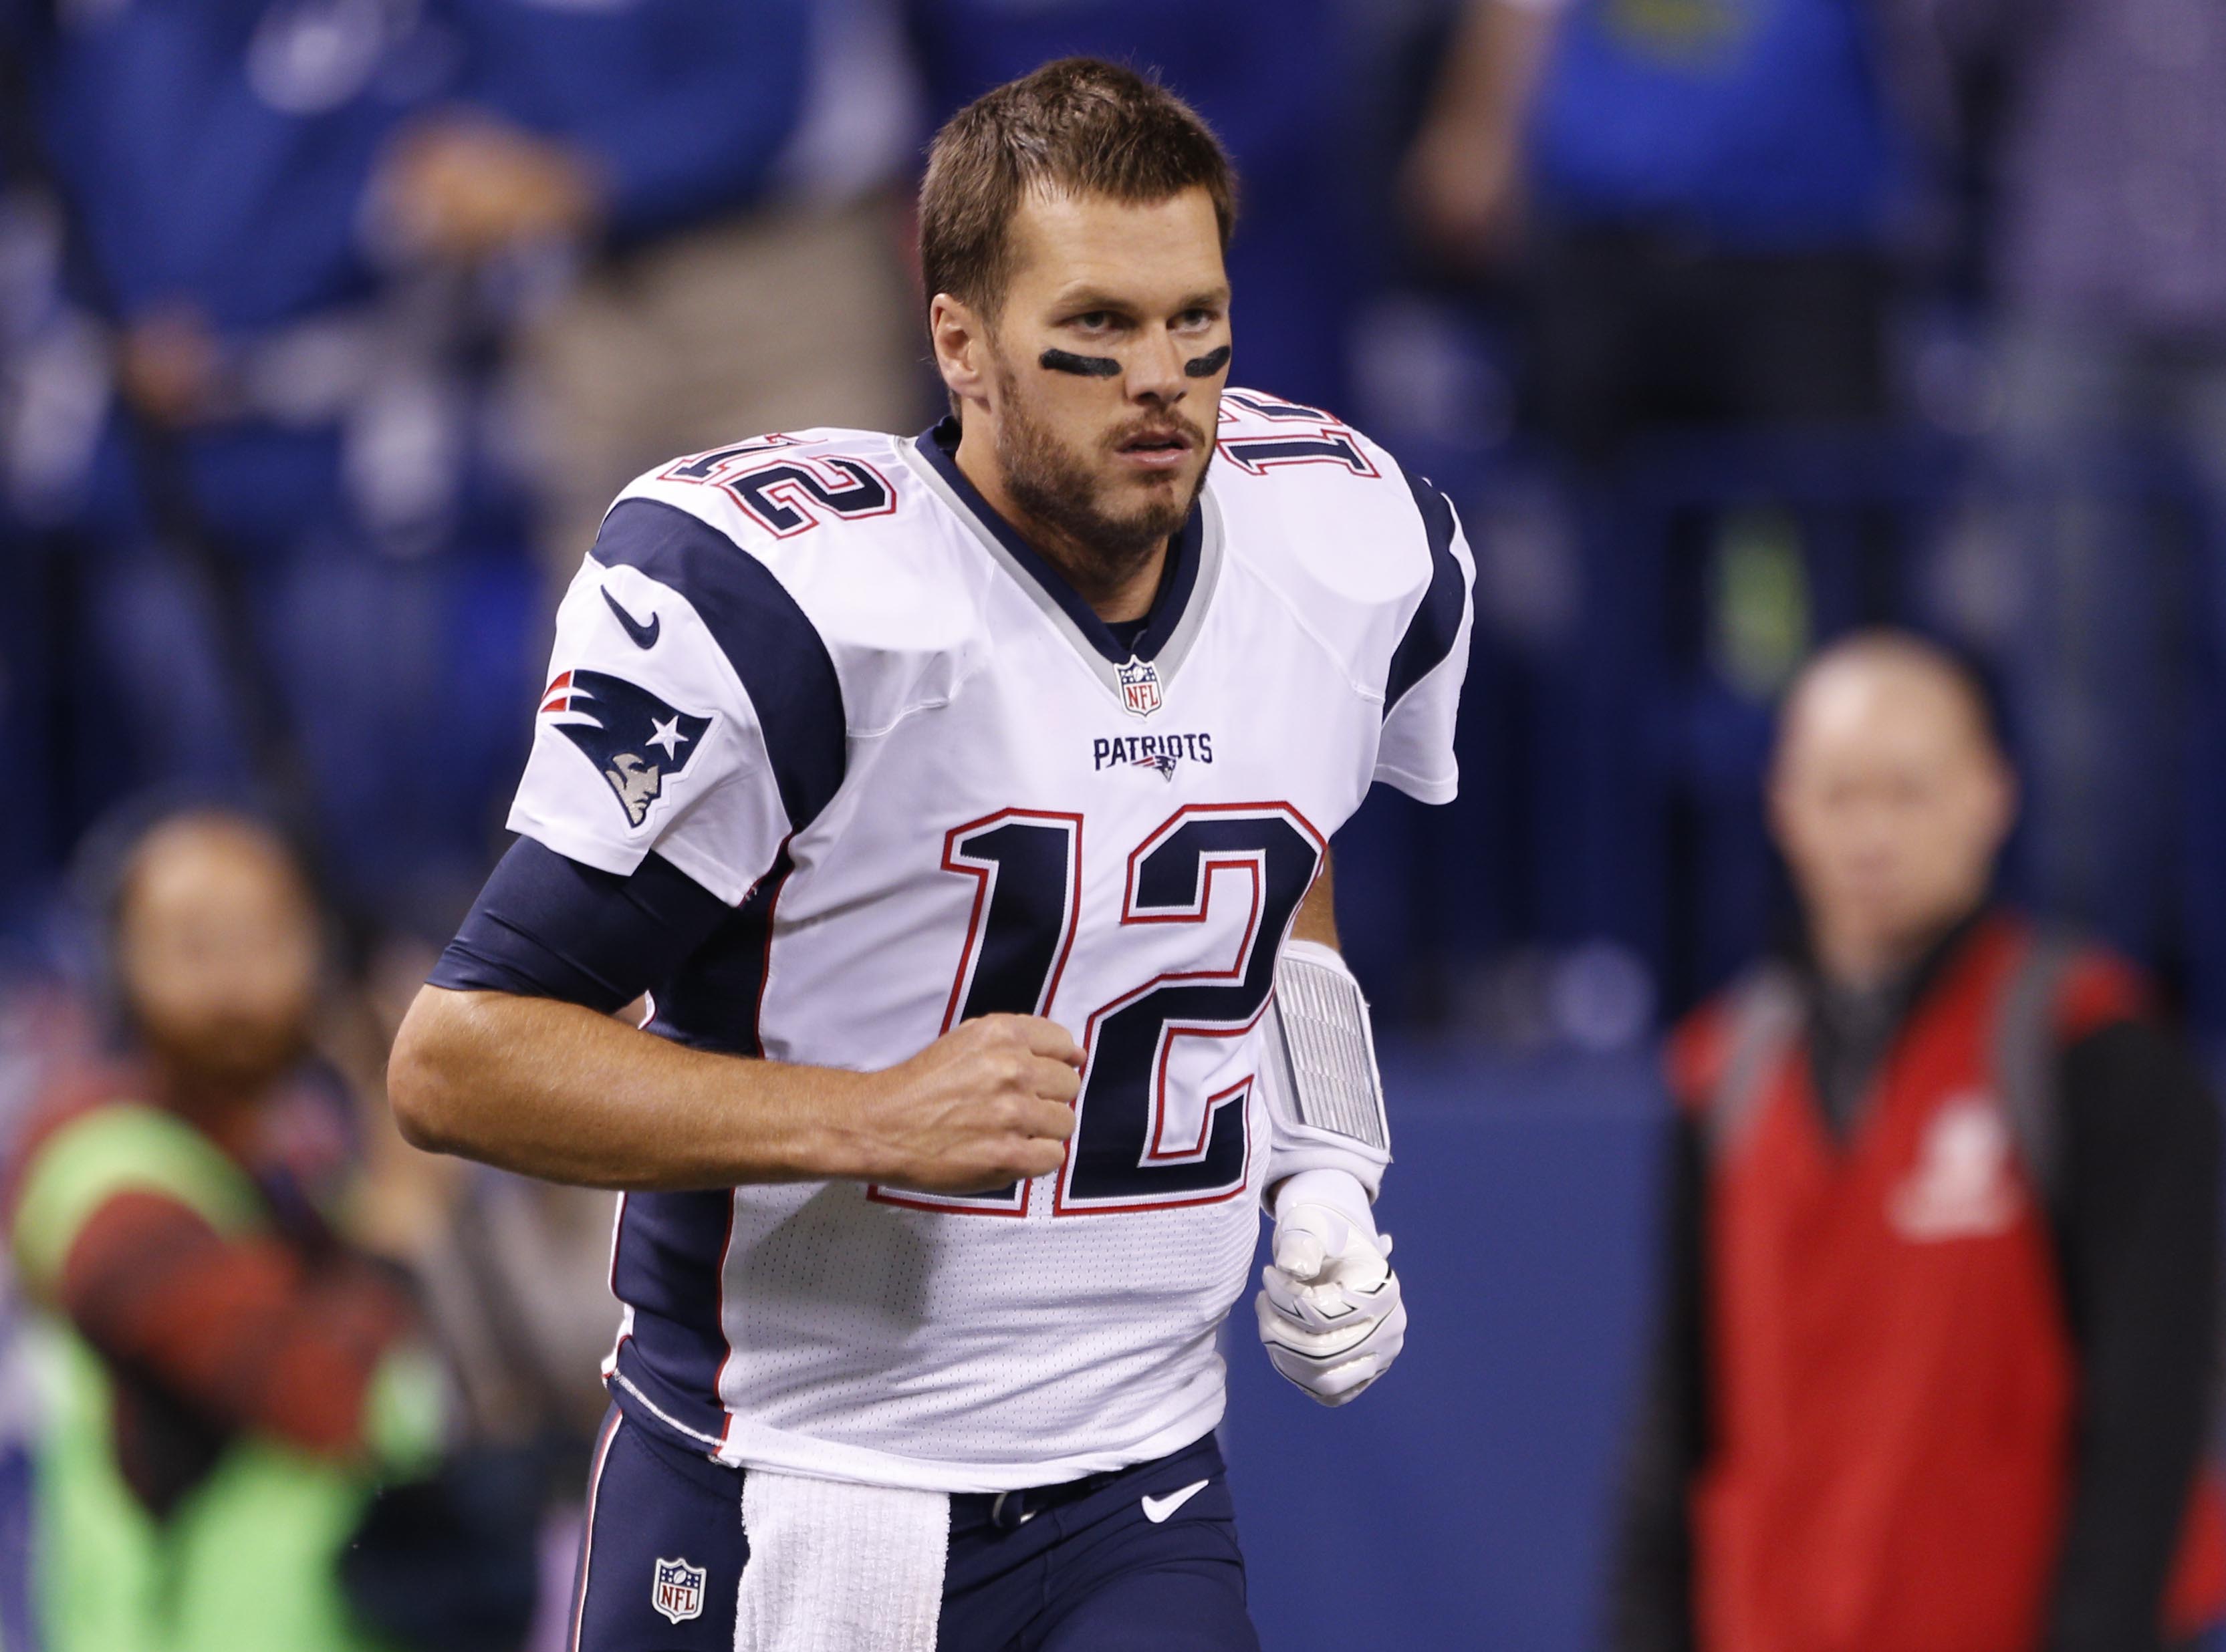 Tom Brady's missing Super Bowl 51 jersey valued at $500,000 by